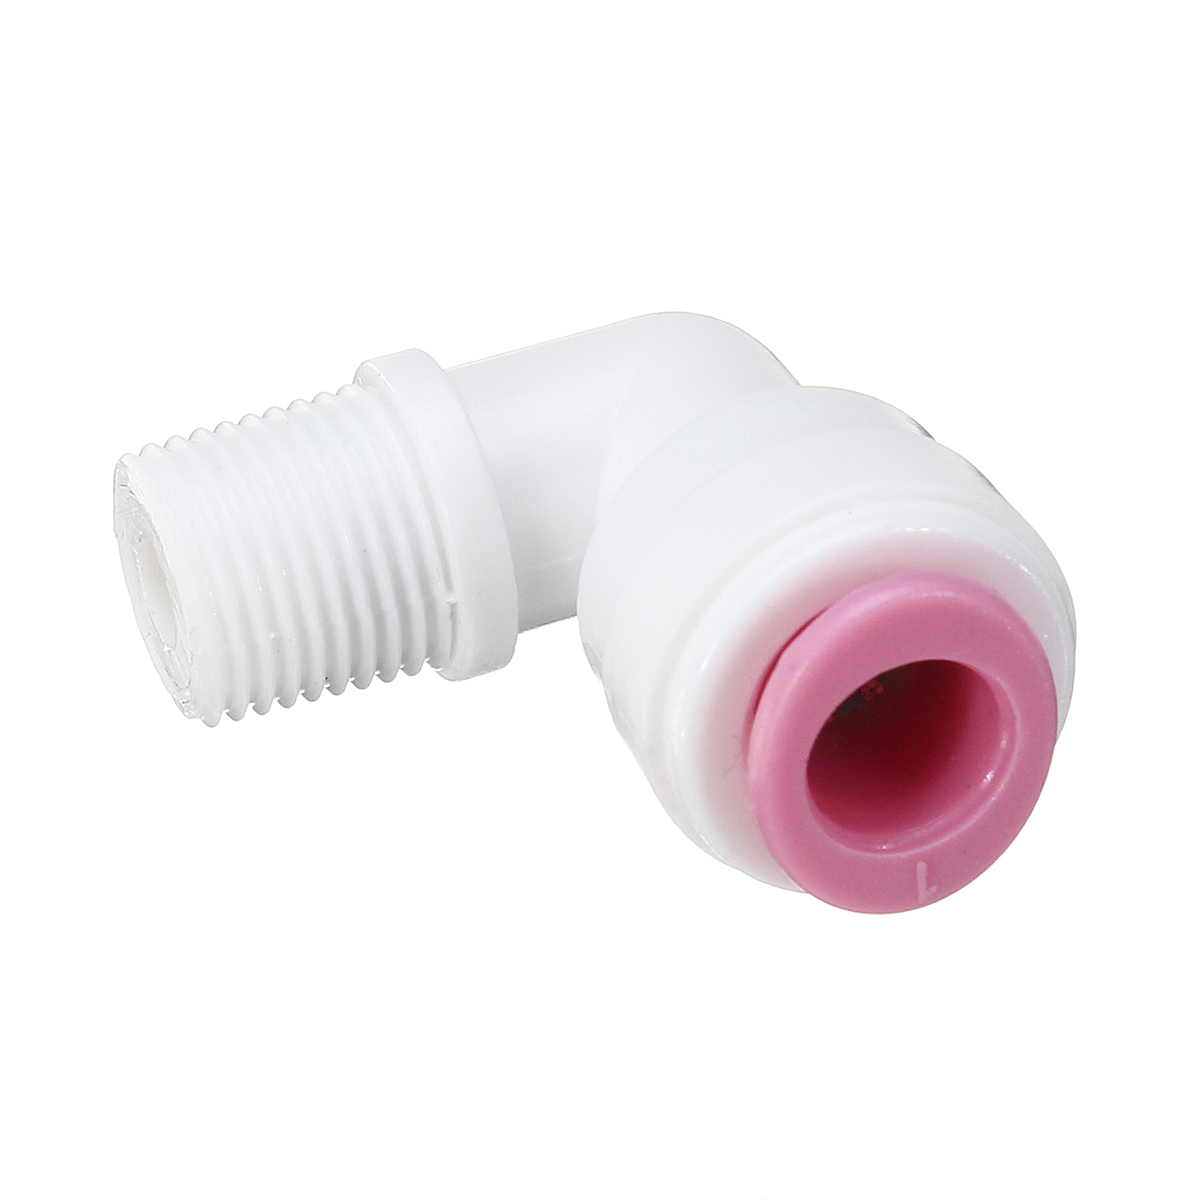 14-18-Inch-RO-Grade-Water-Pipes-Fittings-Quick-Connect-Push-In-to-Connect-Water-Pipe-1378099-3